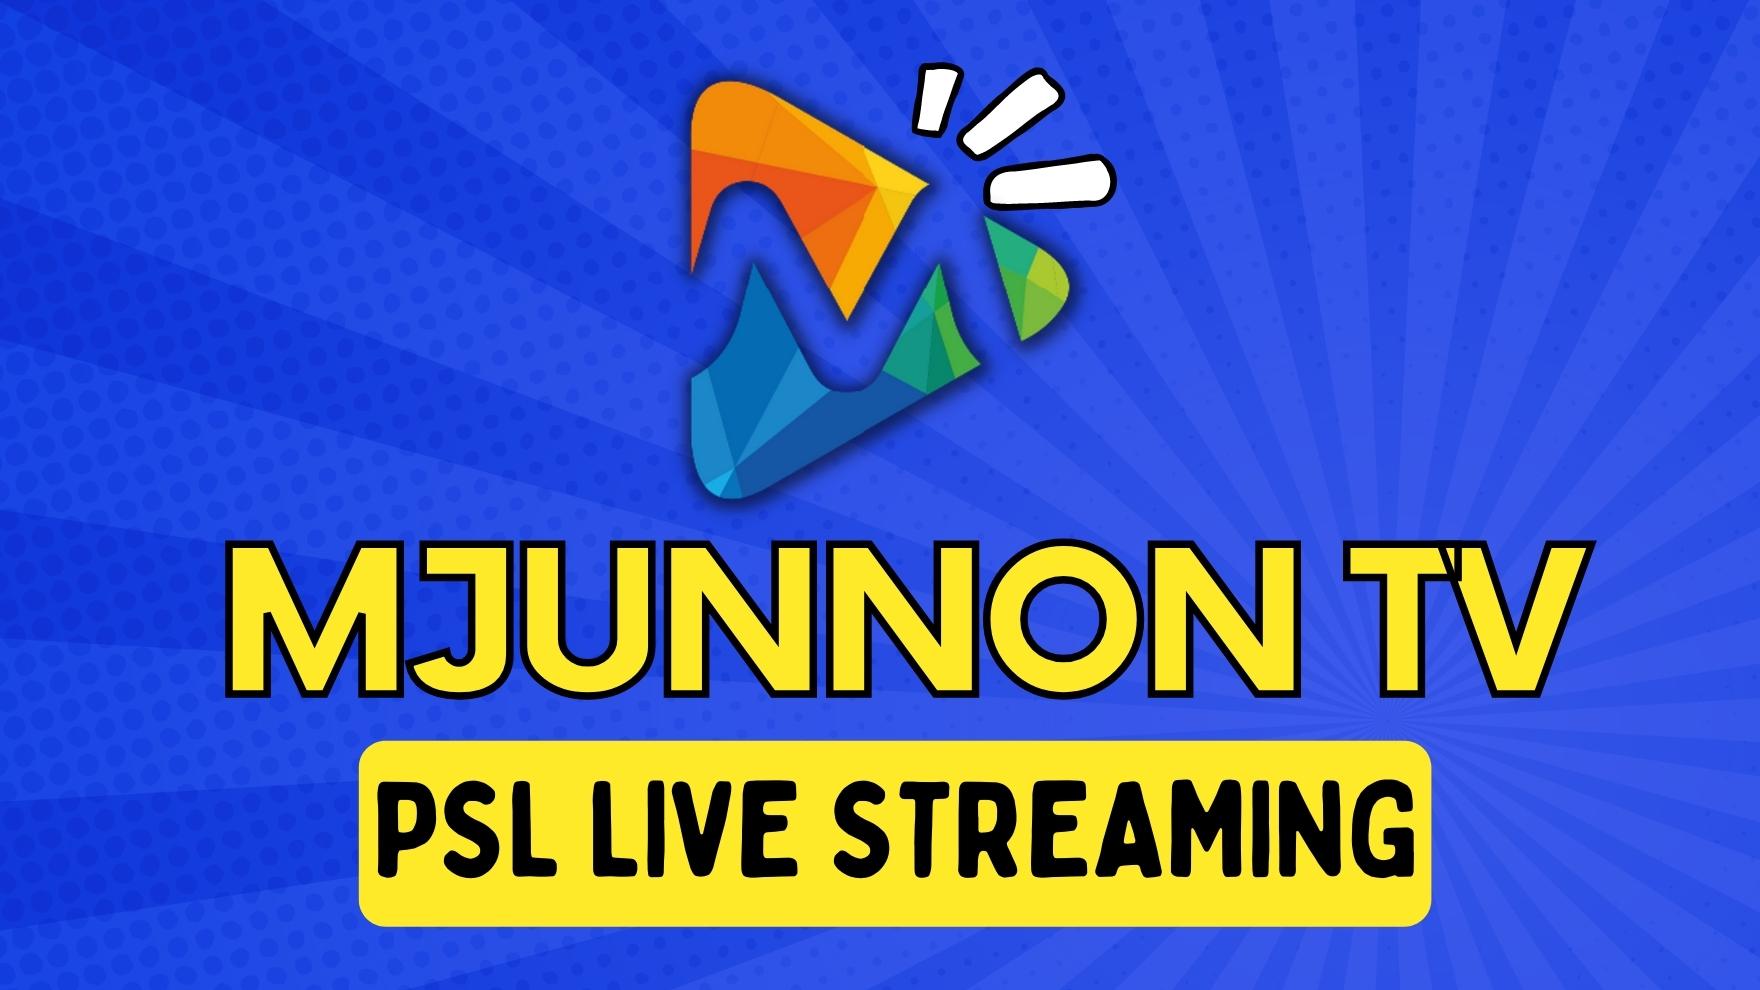 How to watch Mjunnon tv psl live streaming